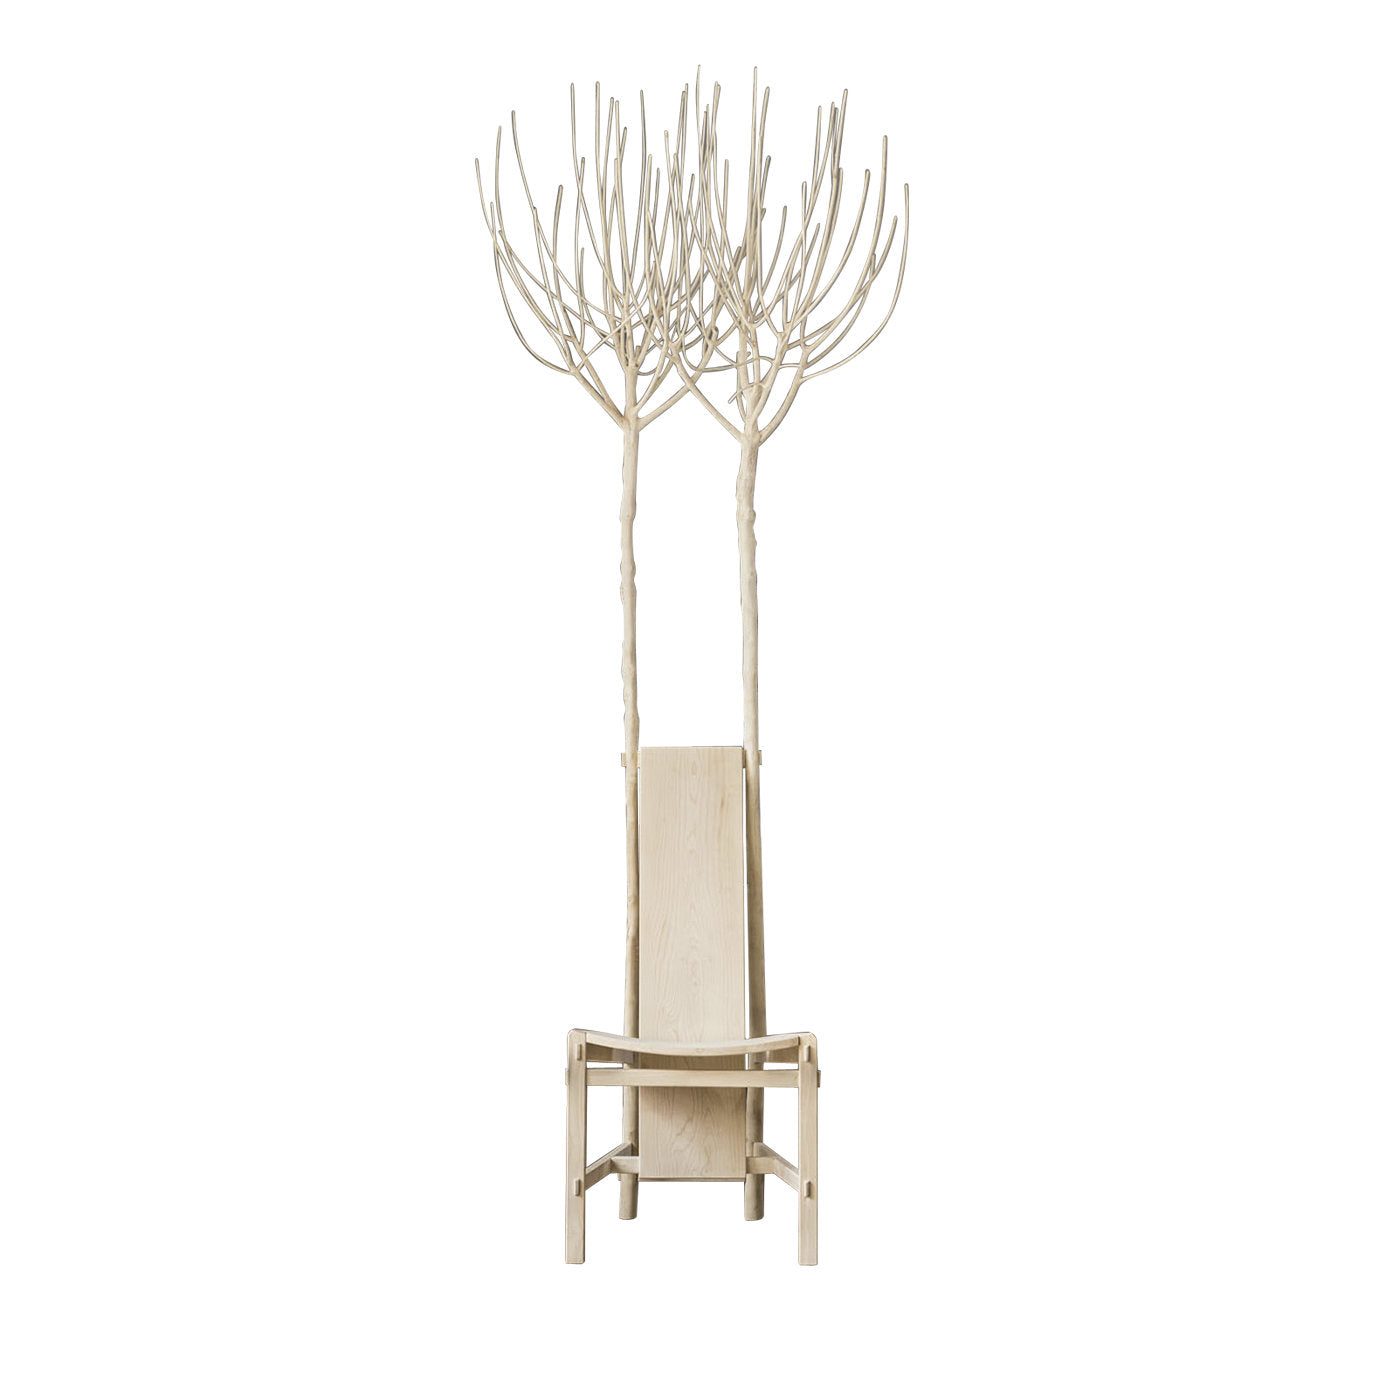 Fiorita Maple Wood Chair with Beige Color - Main view